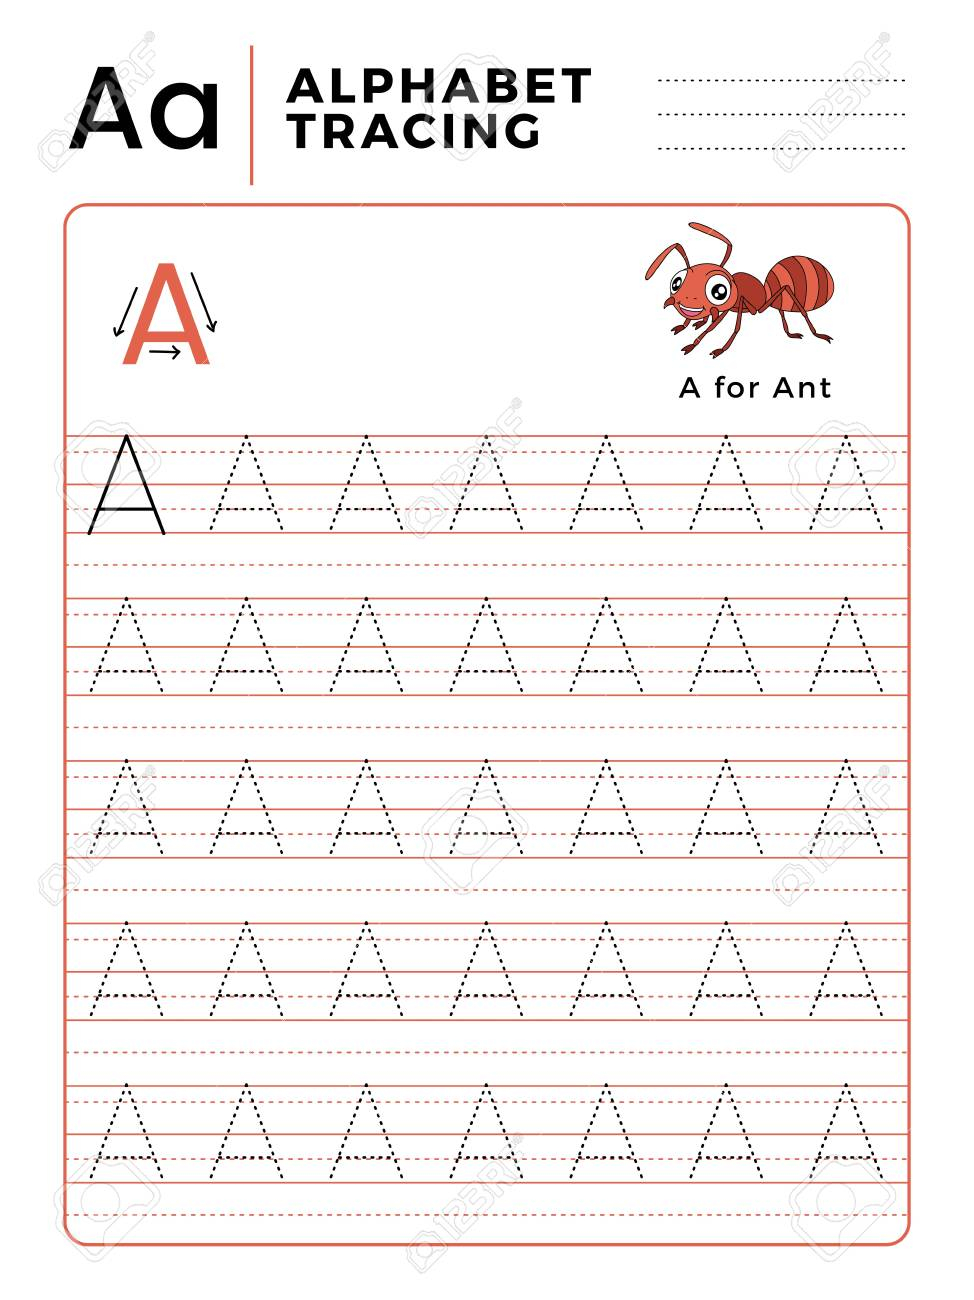 Letter A Alphabet Tracing Book With Example And Funny Ant Insect..